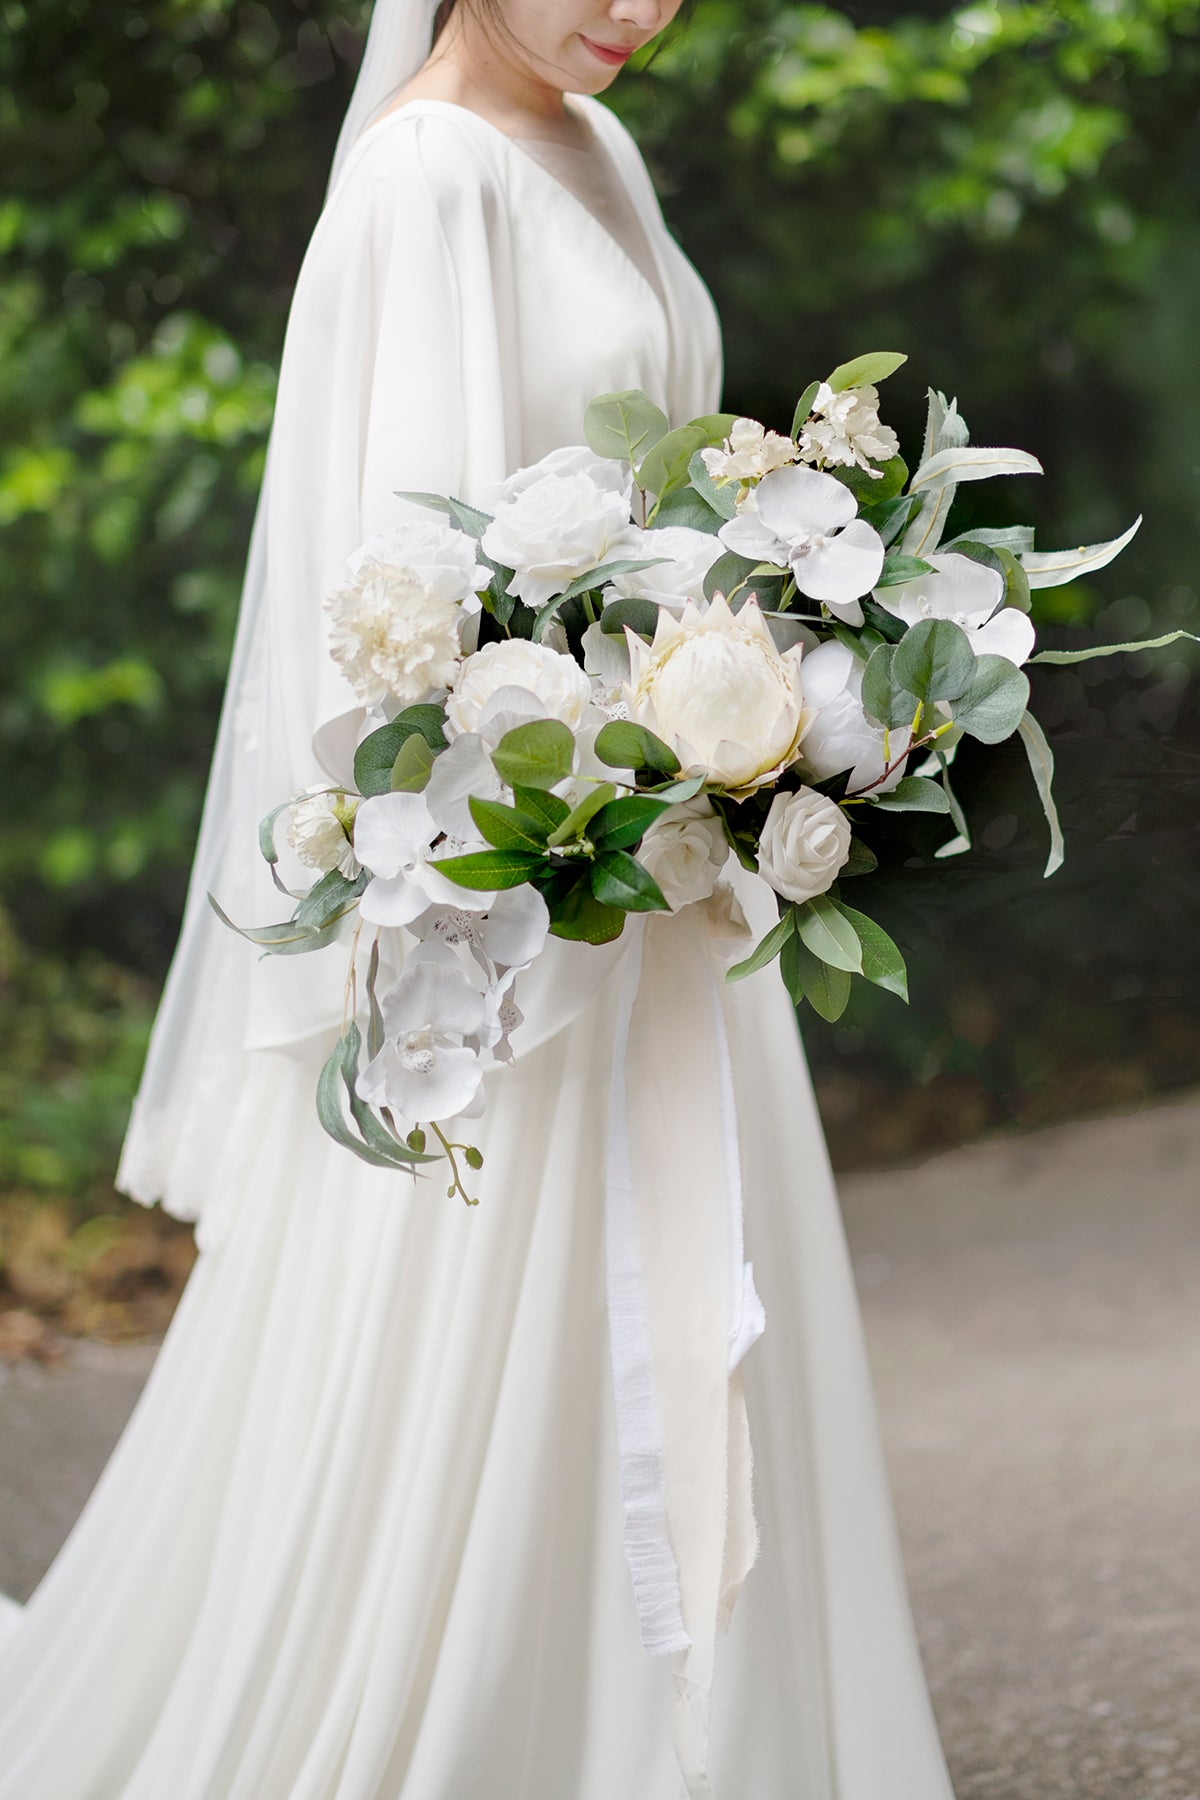 Large Free-Form Bridal Bouquets in Natural Whites | Clearance